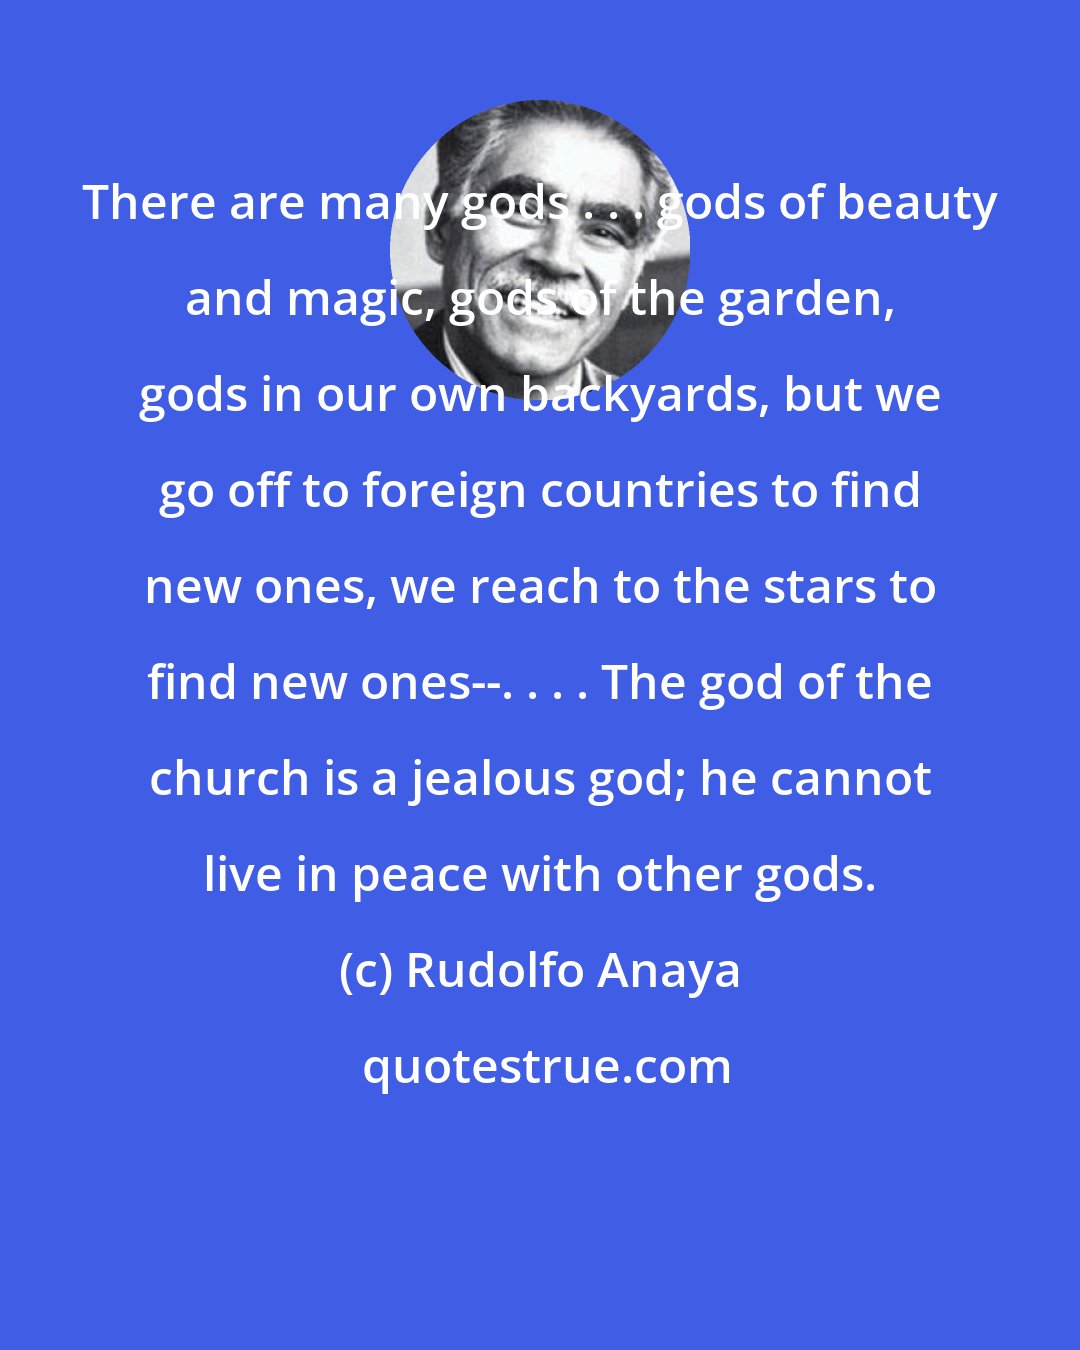 Rudolfo Anaya: There are many gods . . . gods of beauty and magic, gods of the garden, gods in our own backyards, but we go off to foreign countries to find new ones, we reach to the stars to find new ones--. . . . The god of the church is a jealous god; he cannot live in peace with other gods.